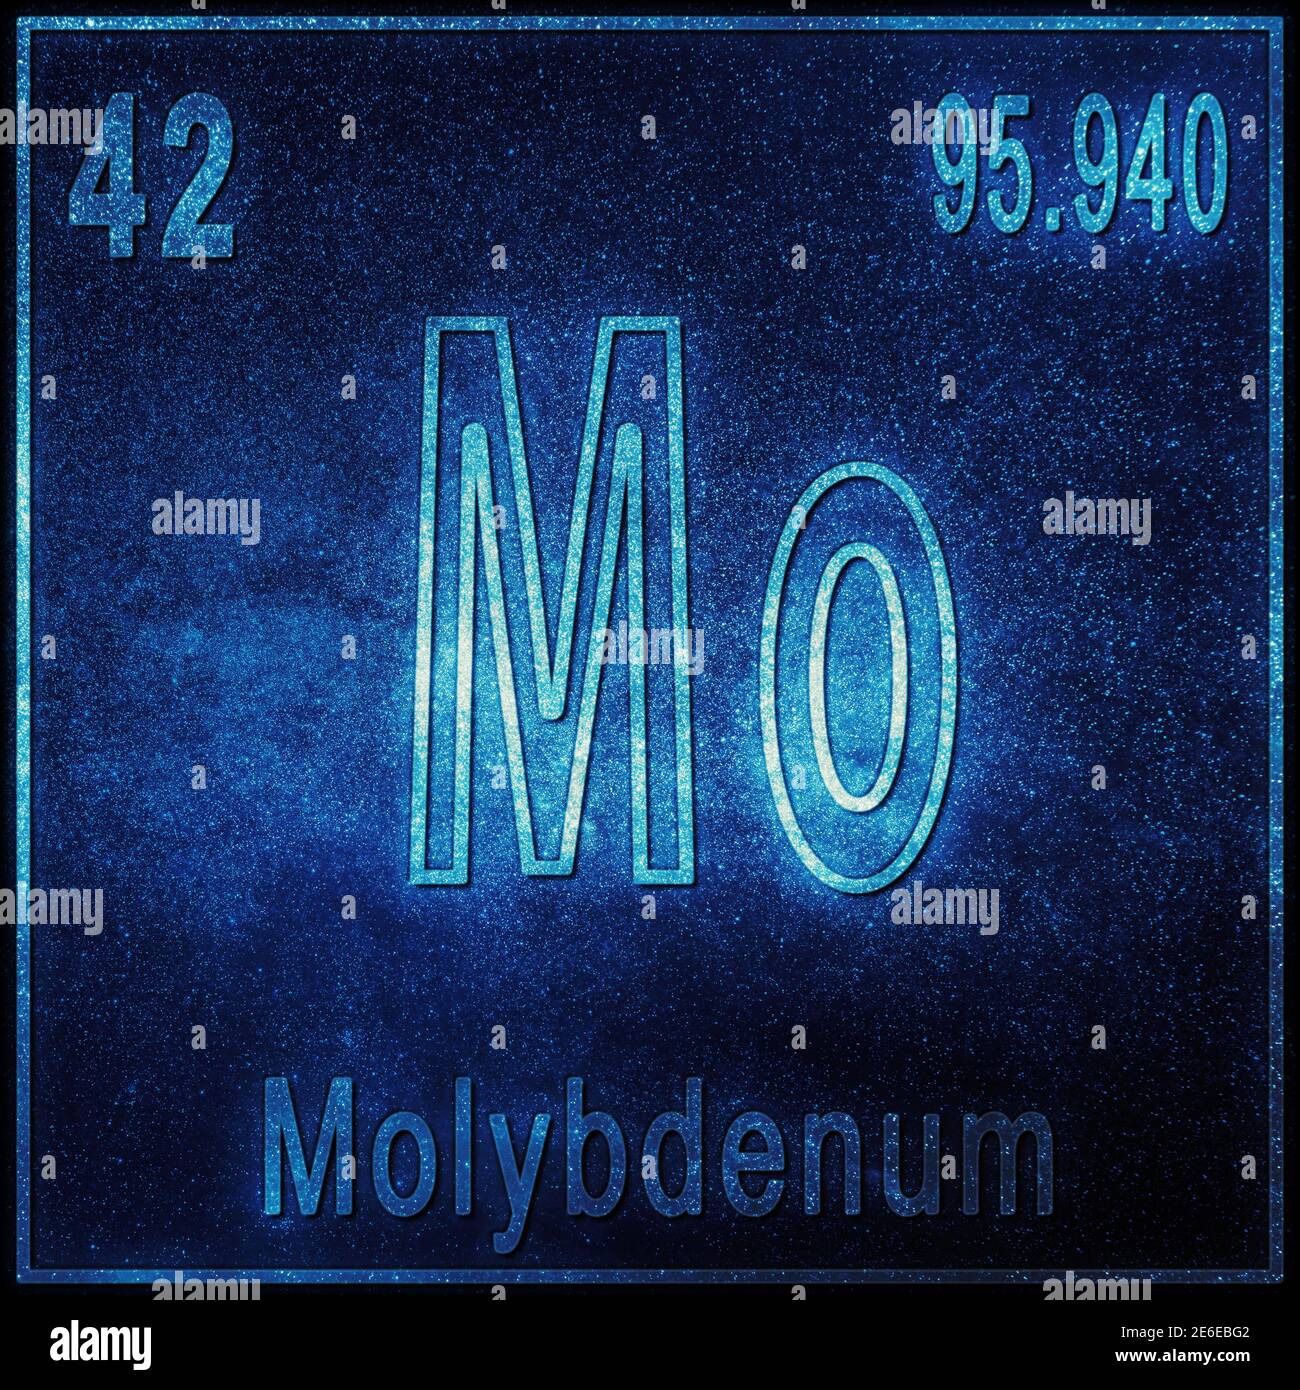 Molybdenum chemical element, Sign with atomic number and atomic weight, Periodic Table Element Stock Photo